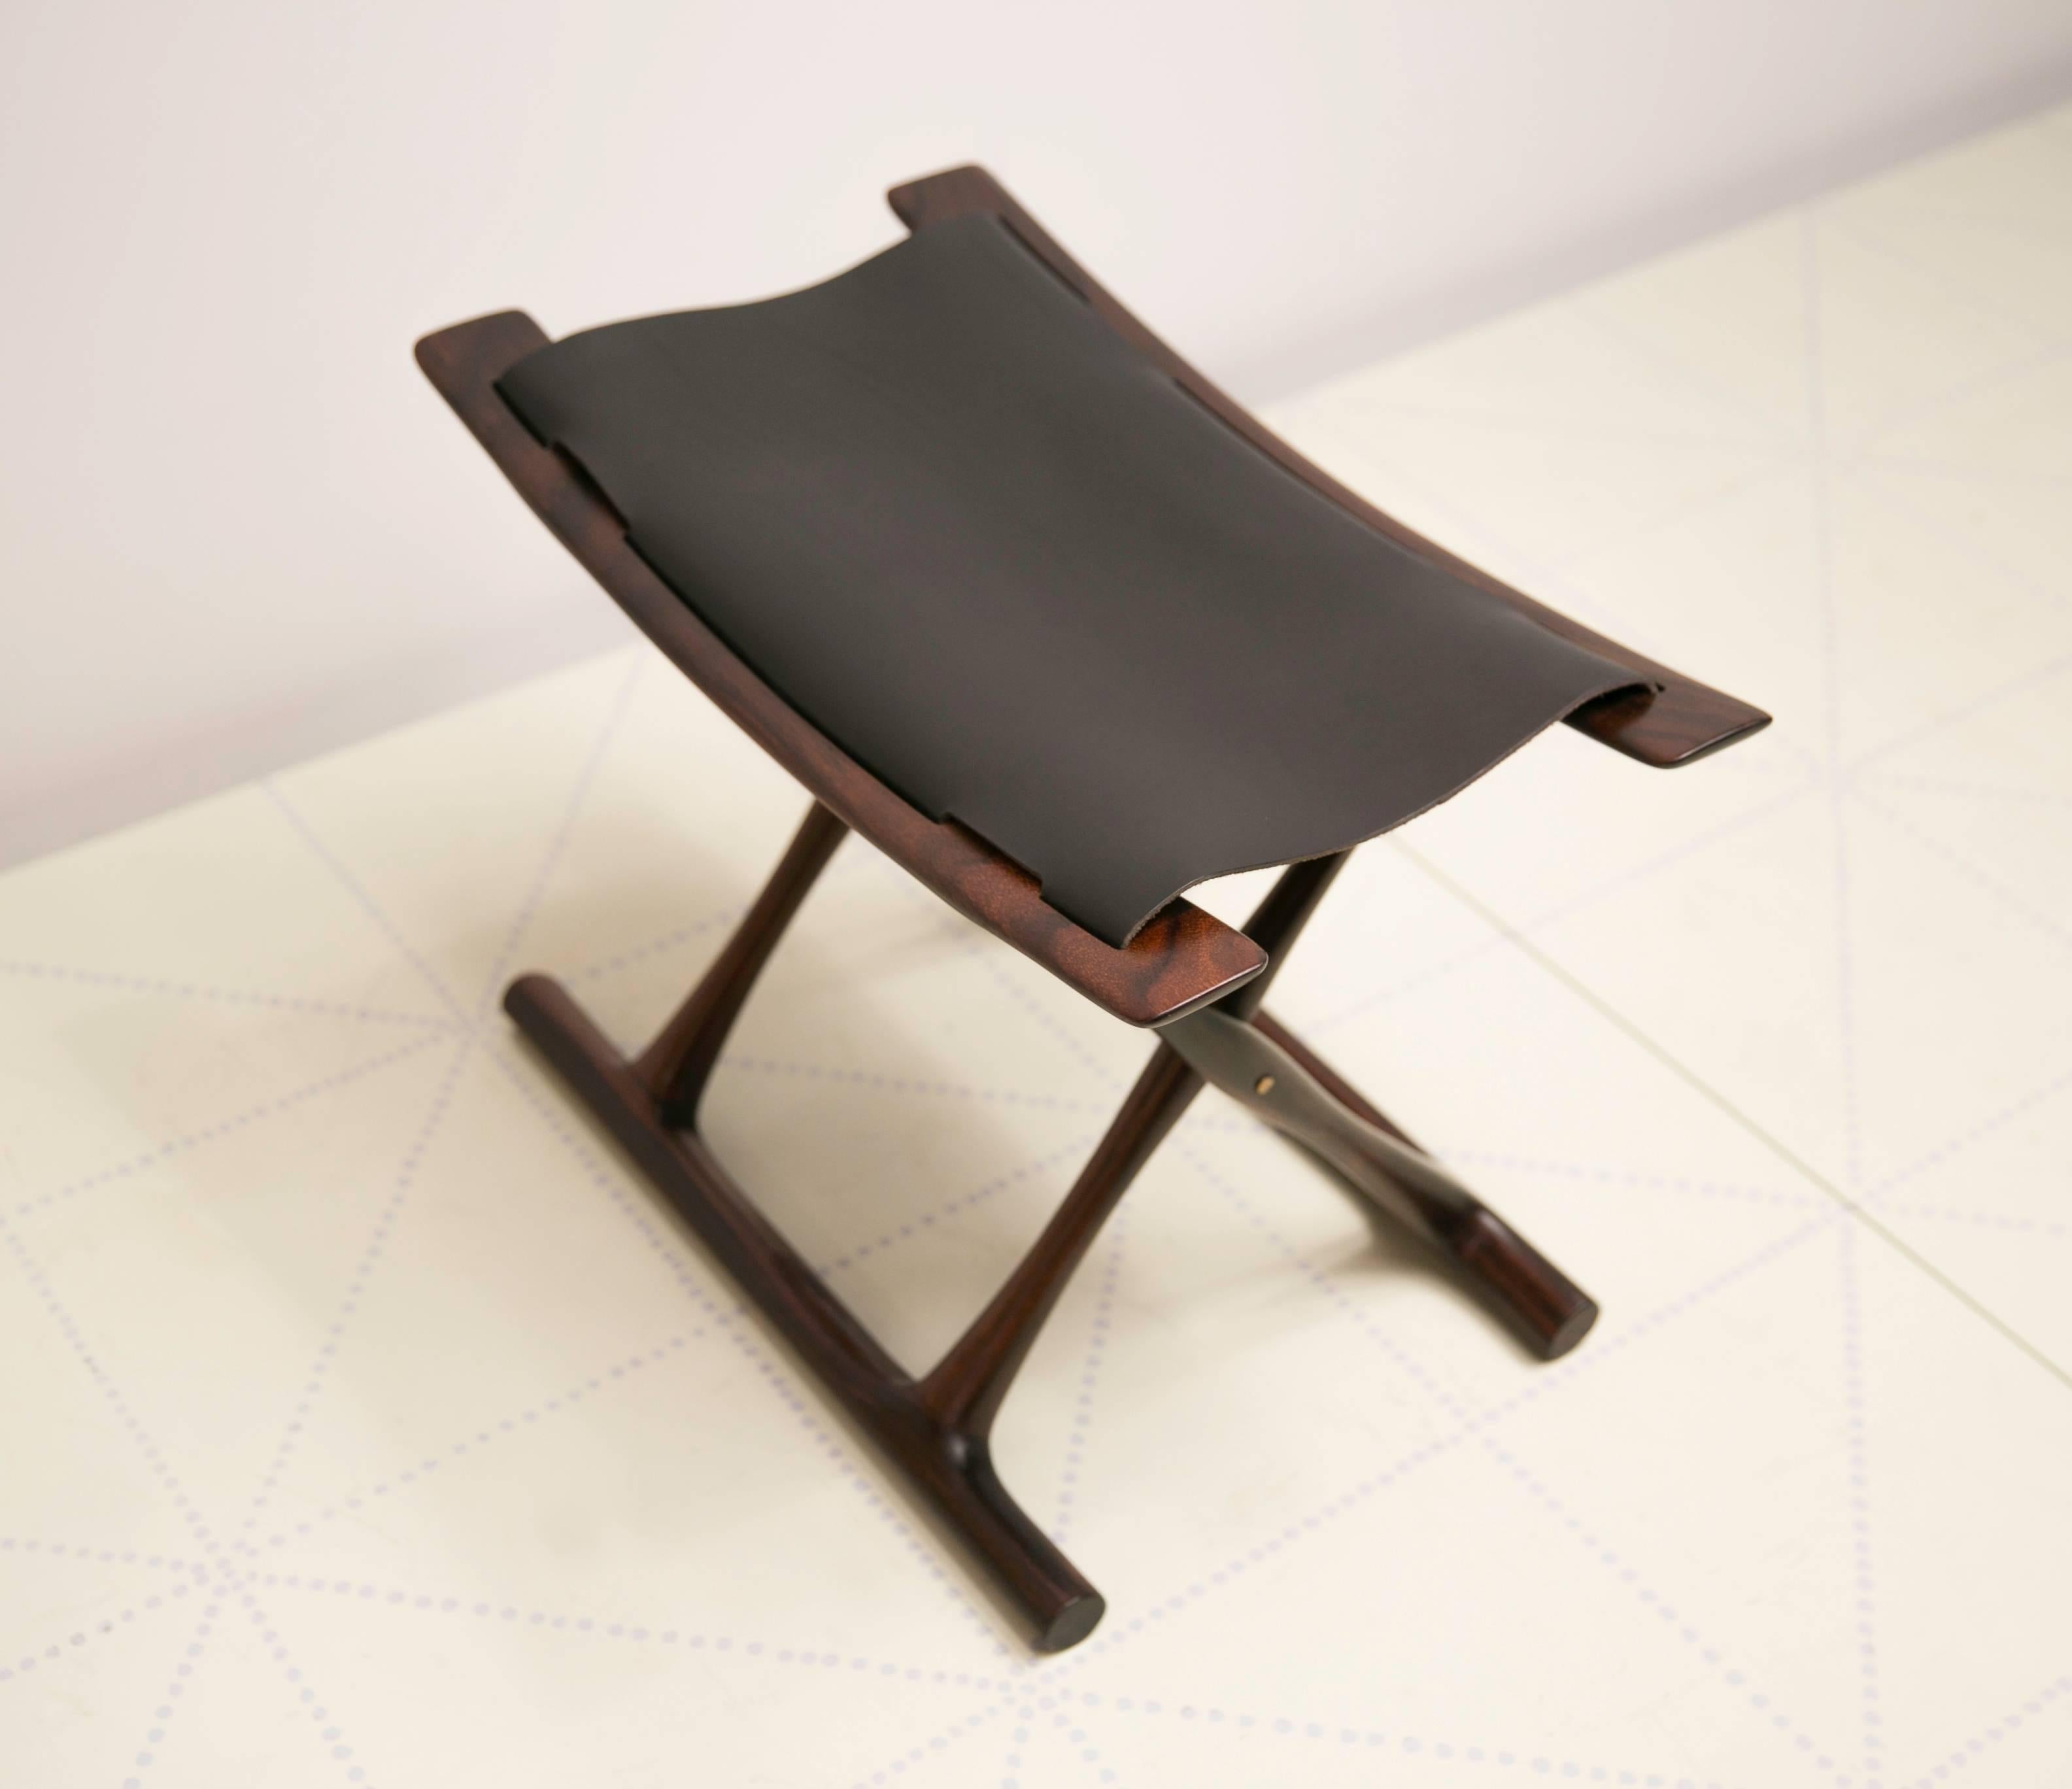 Egyptian Folding Stool by Ole Wanscher in Indian Rosewood and Black Leather. Wanscher's Egyptian stool is one of the icons of Danish design. As was typical of Wanscher, he looked back to previous furniture forms for inspiration and